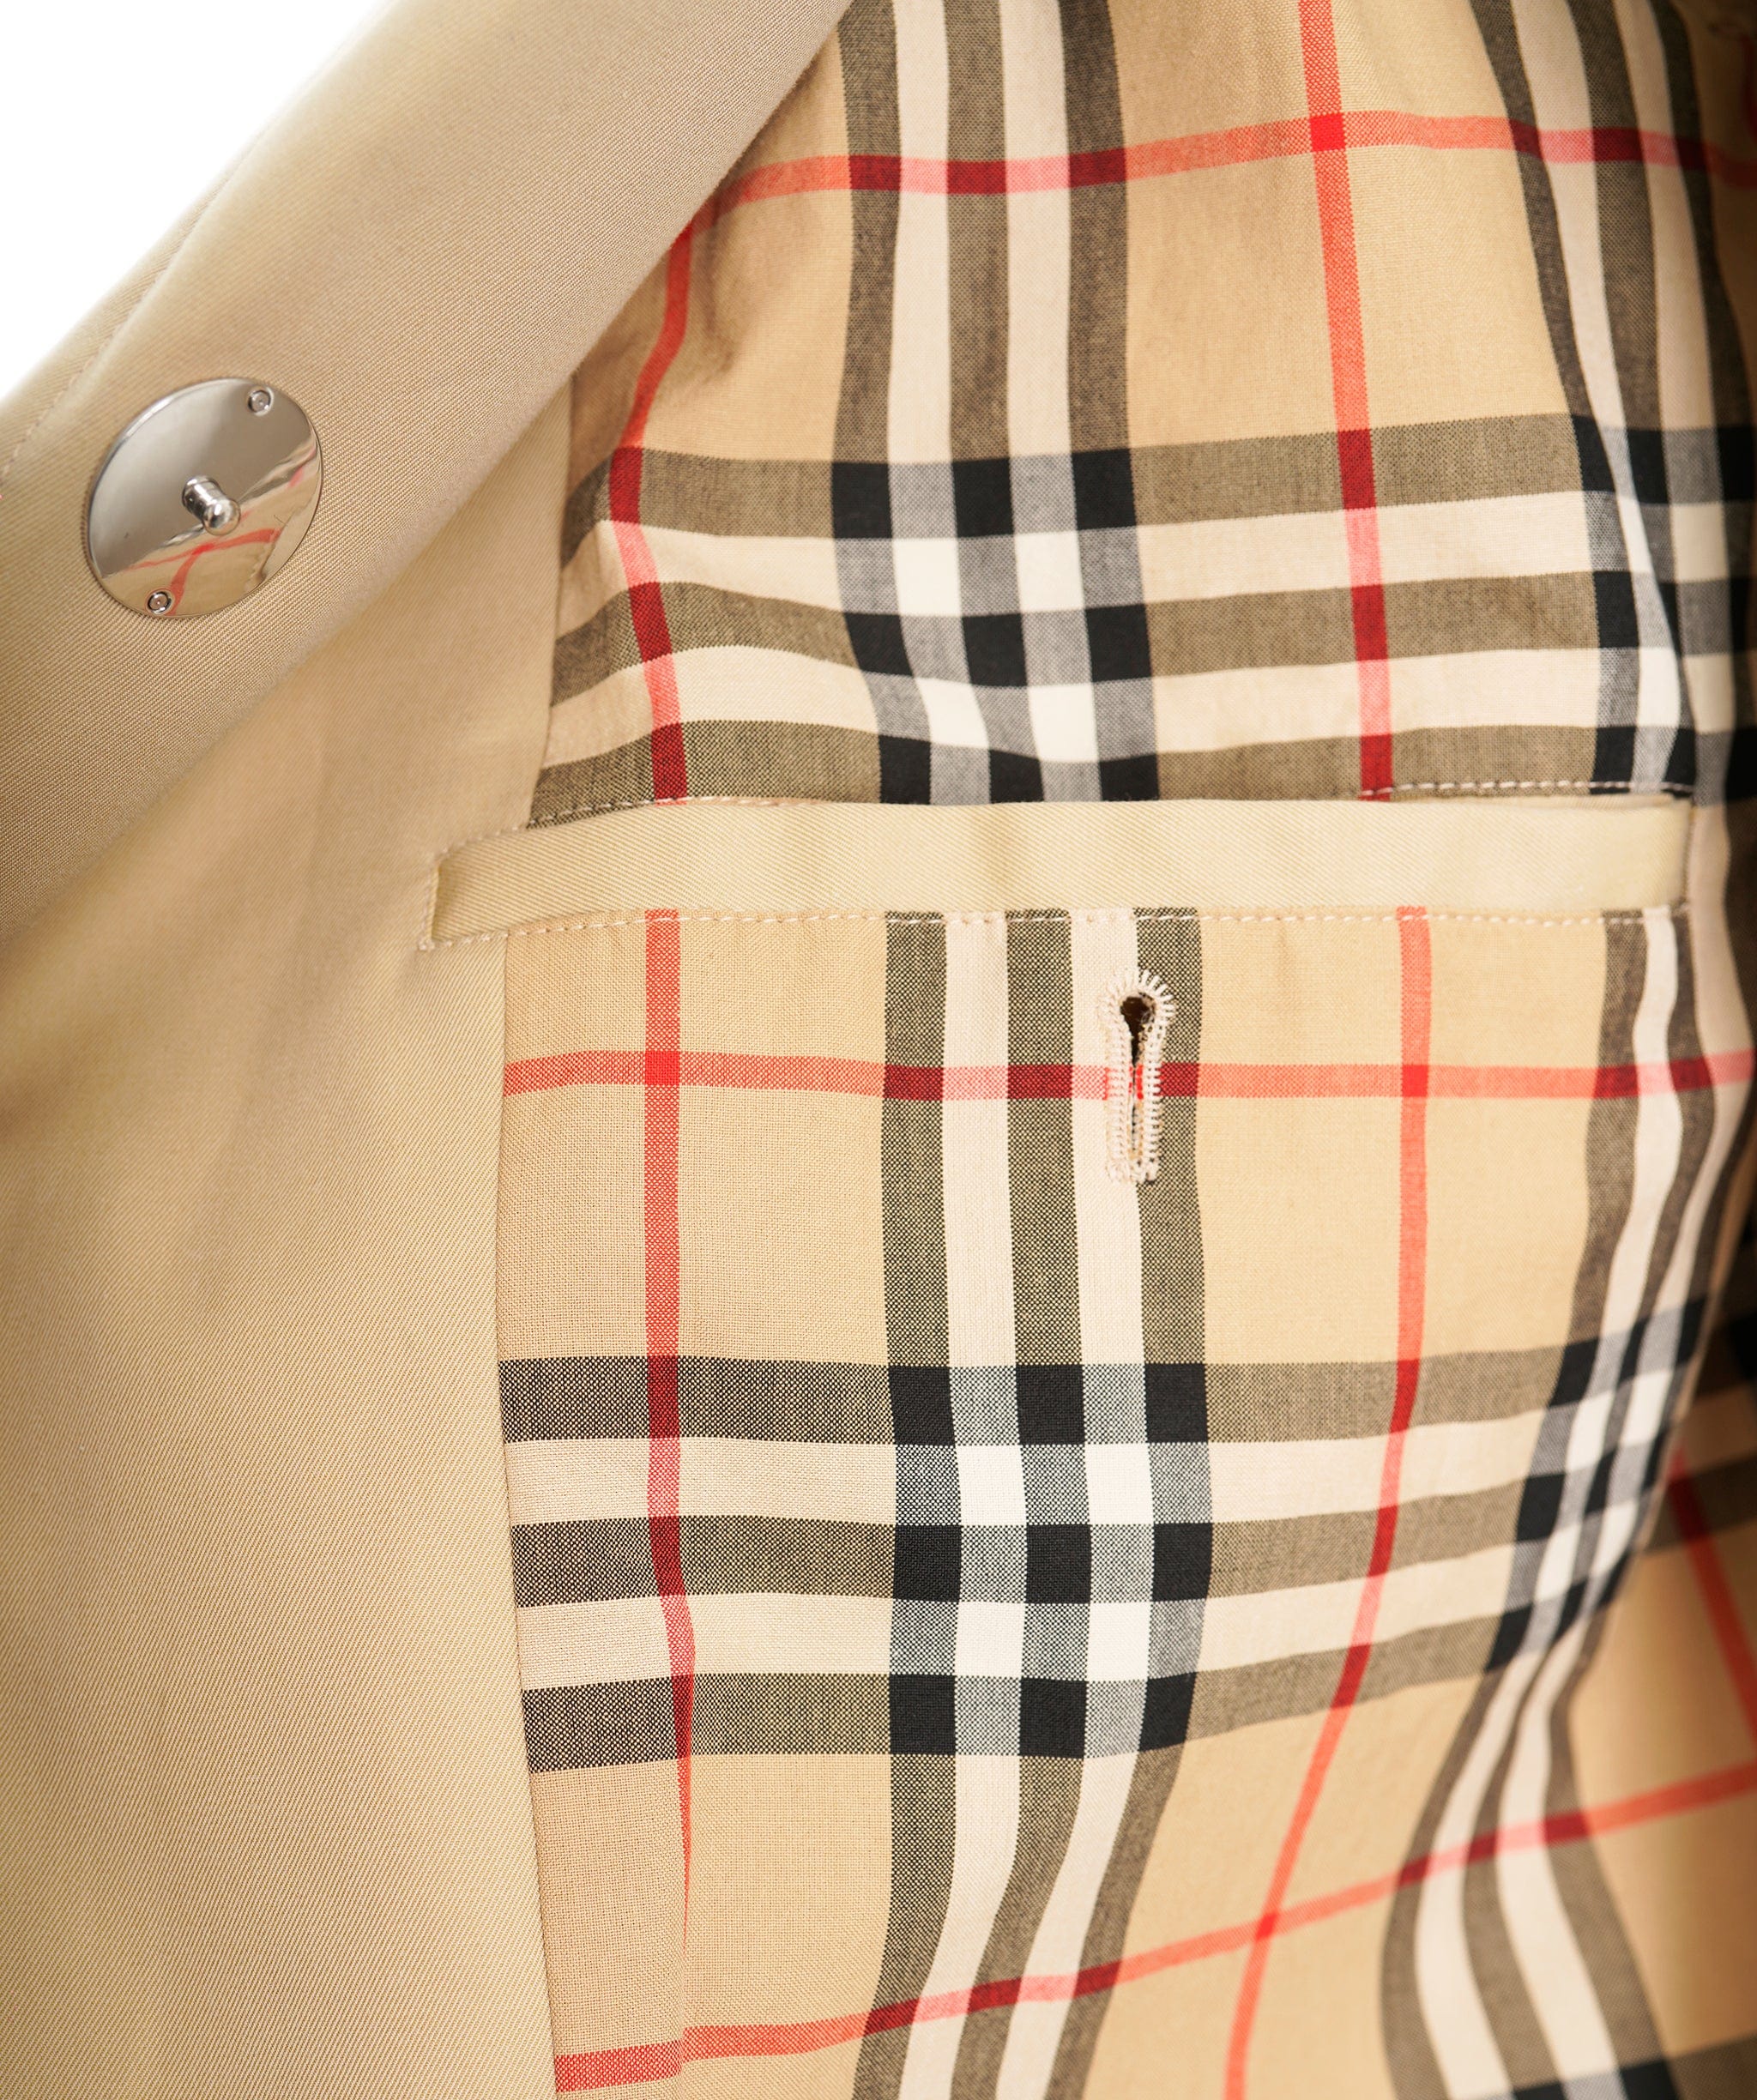 Burberry Burberry Single Breasted Coat Size UK 6 ALC0922